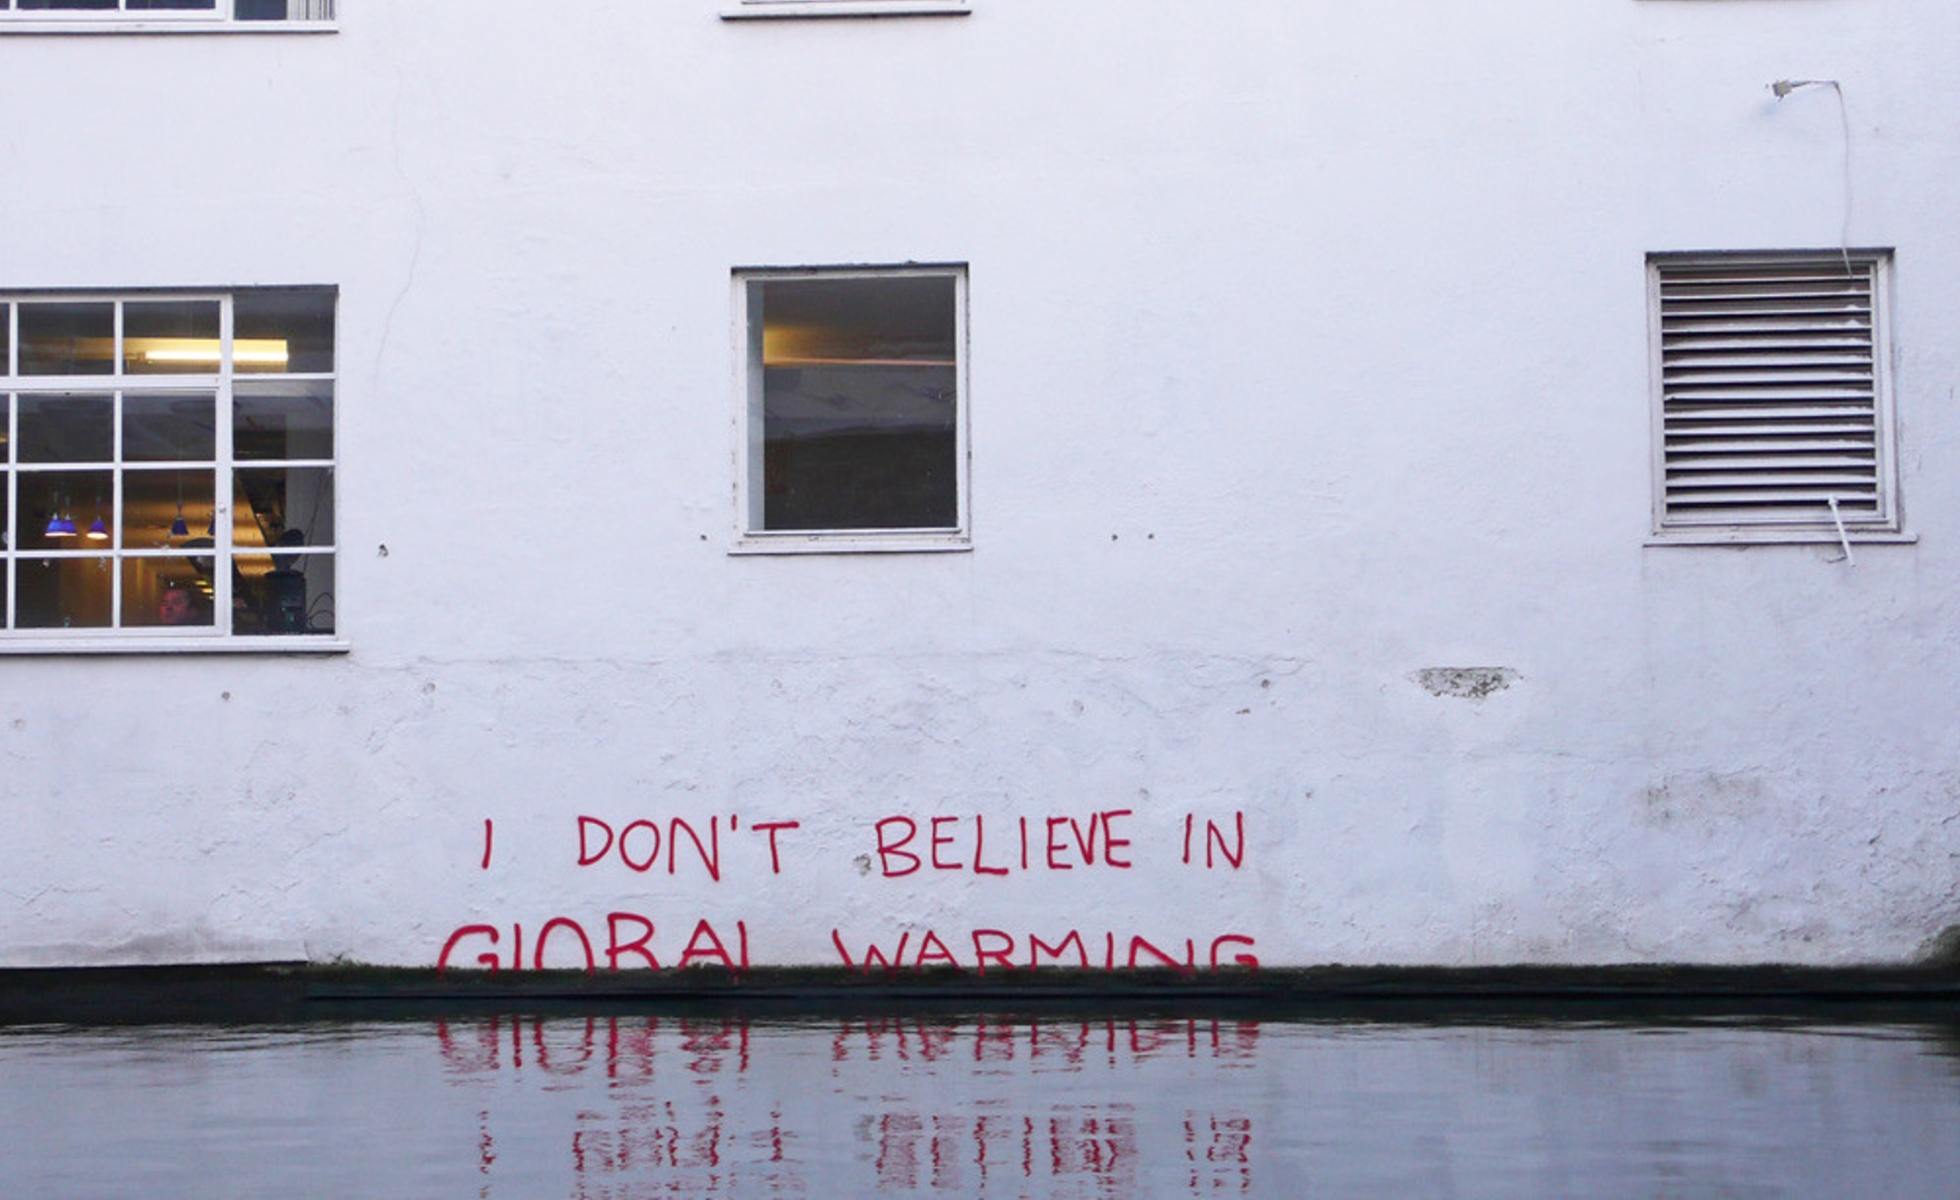 “I doThose who continue to spread doubt and confusion about climate science are starting to look even more ridiculous with their many conflicting, insubstantial arguments.n't believe in Global Warming”: Climate change denial by #Banksy